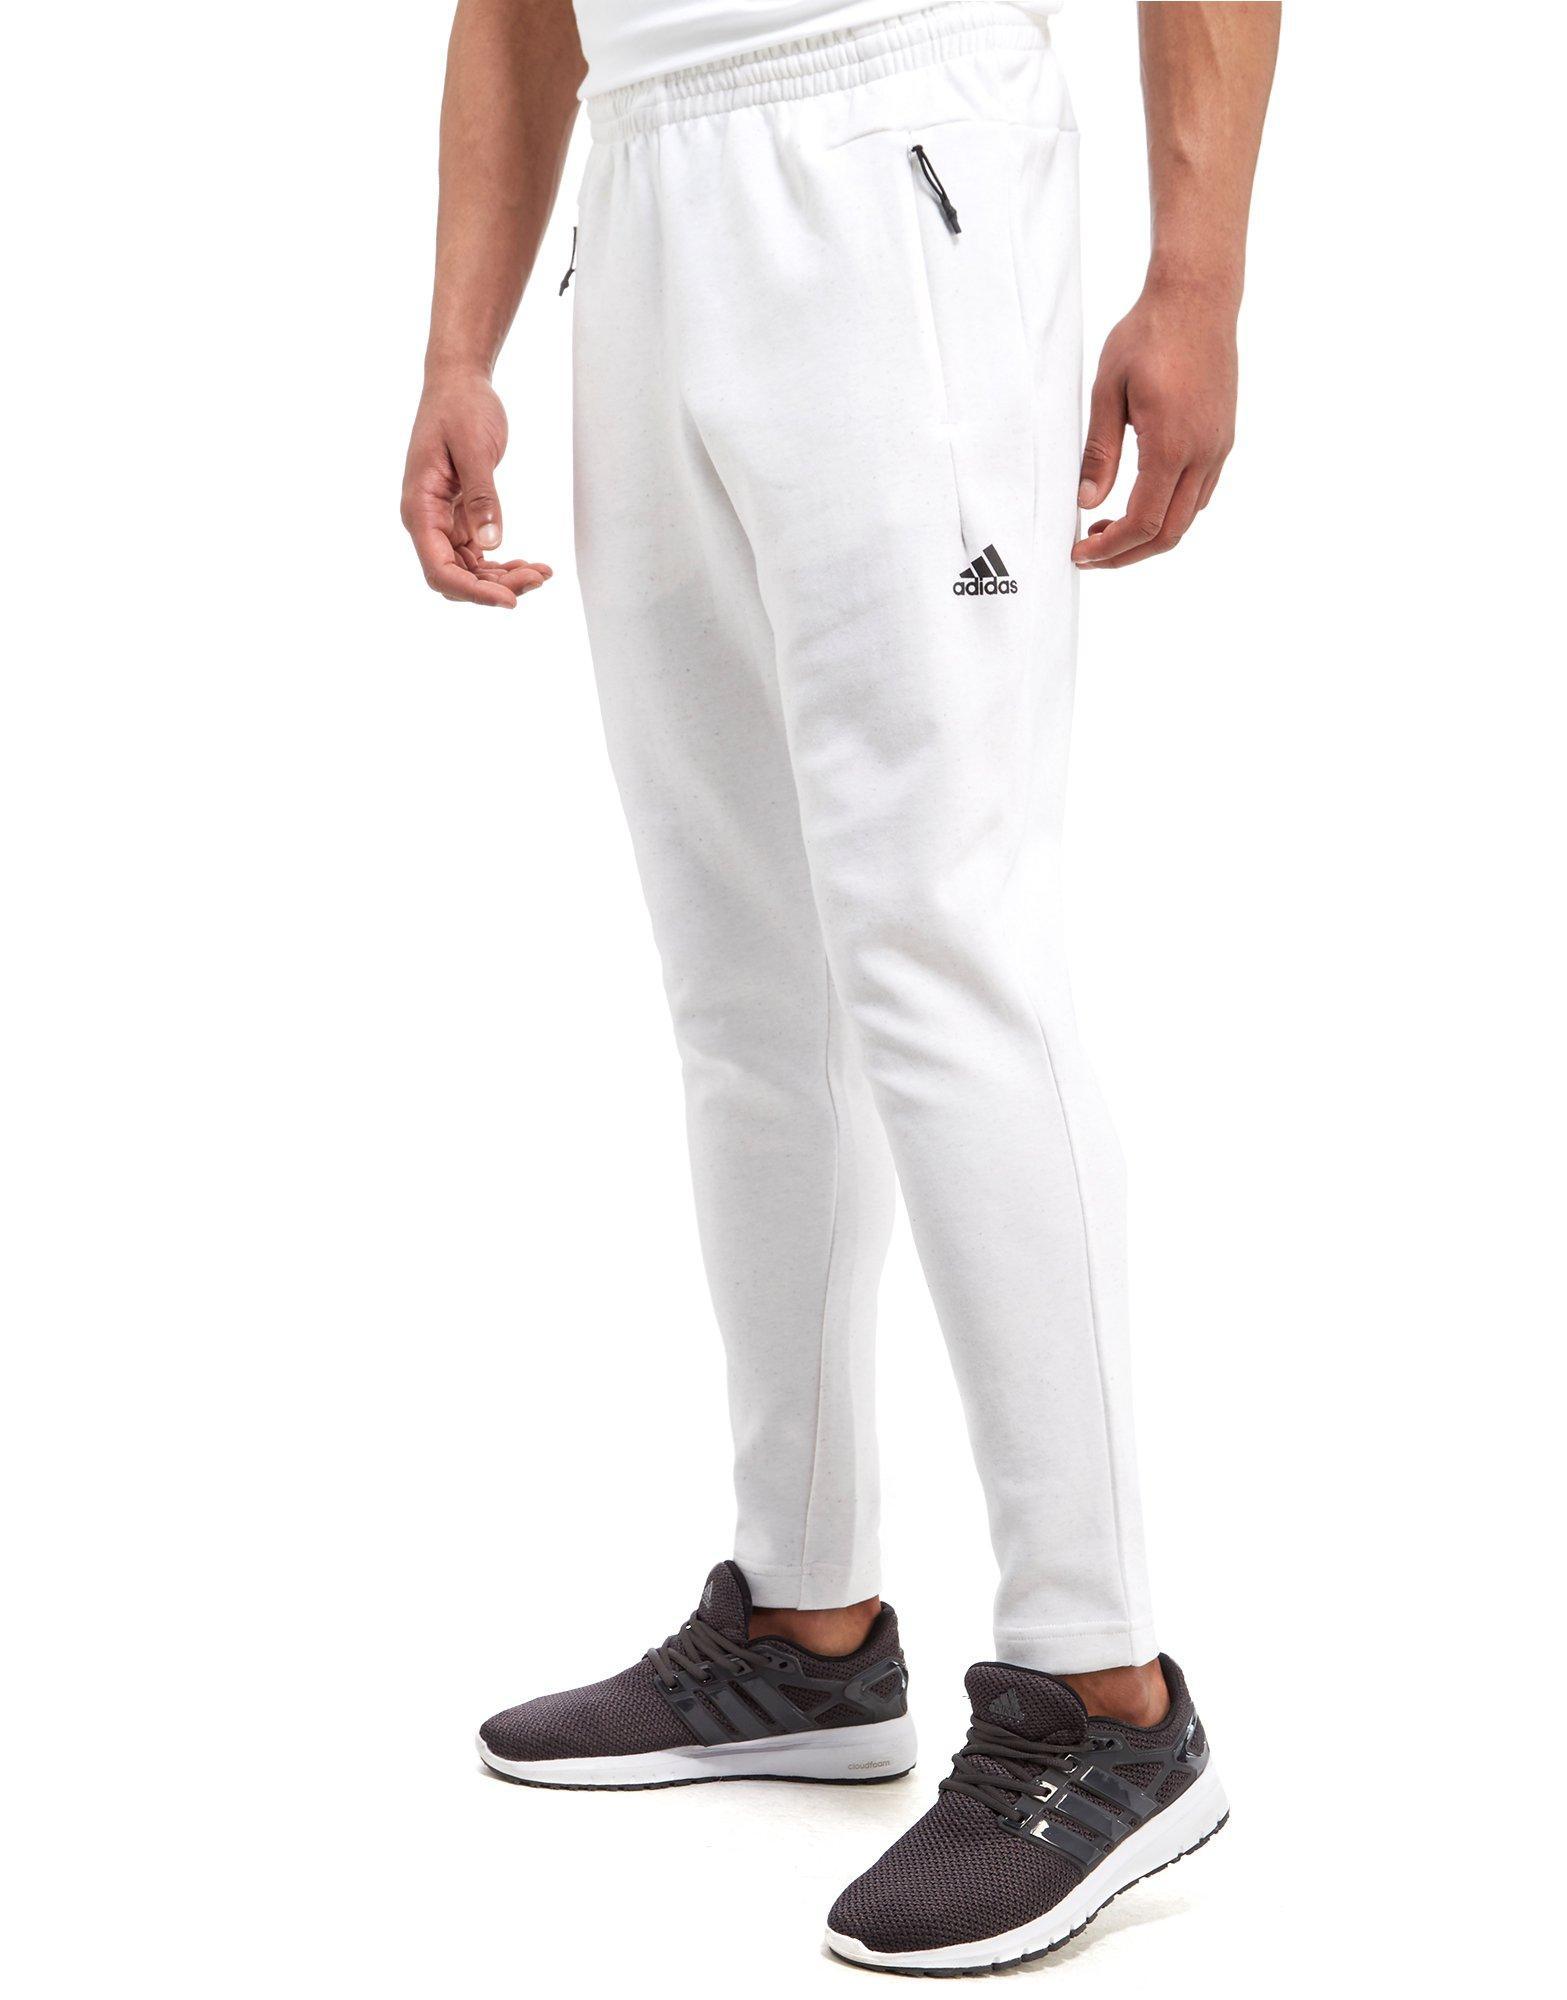 Lyst - adidas Id Stadium Pants in White for Men